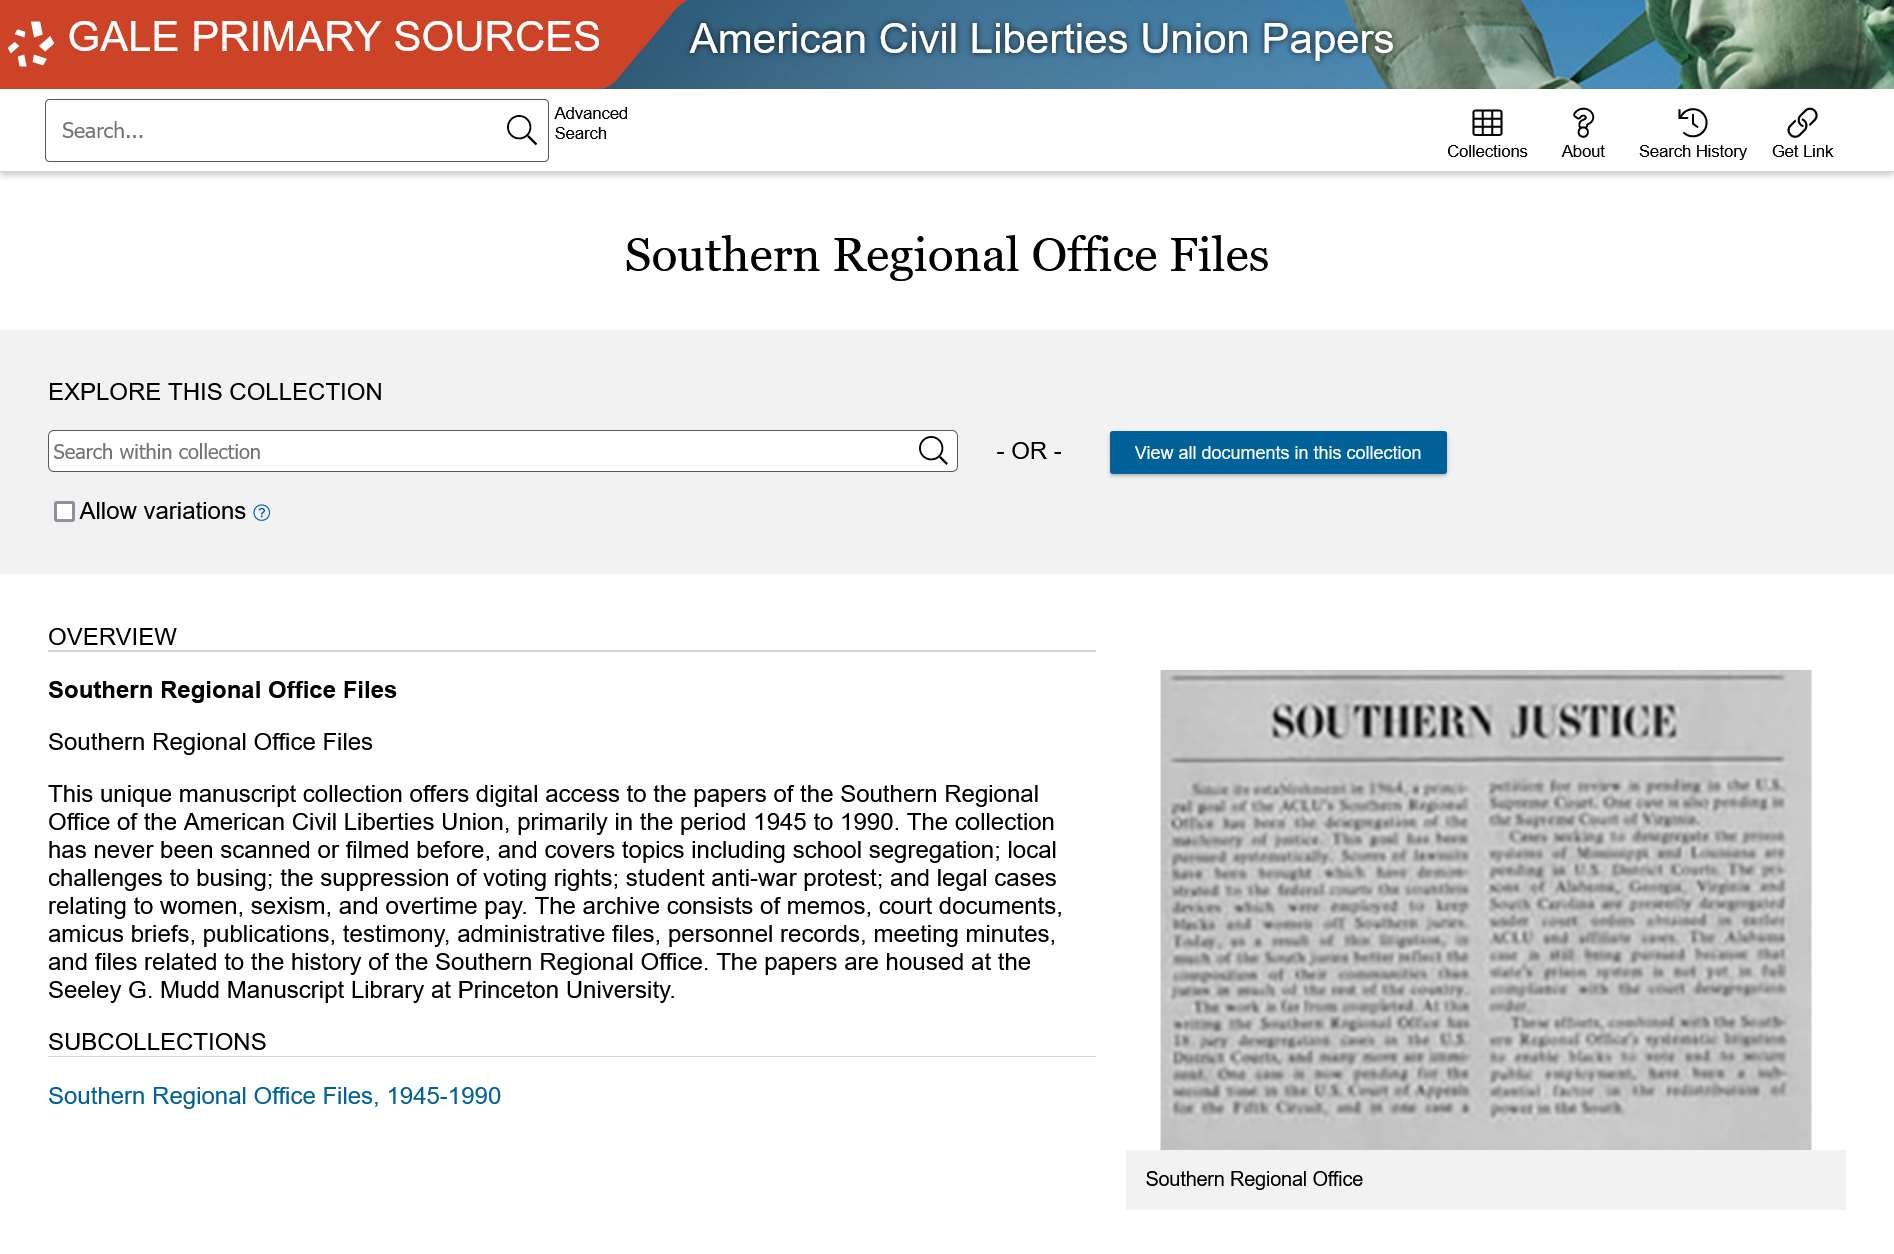 The Making of Modern Law: American Civil Liberties Union Papers, Part II: Southern Regional Officeの南部支局文書集のコレクション閲覧画面